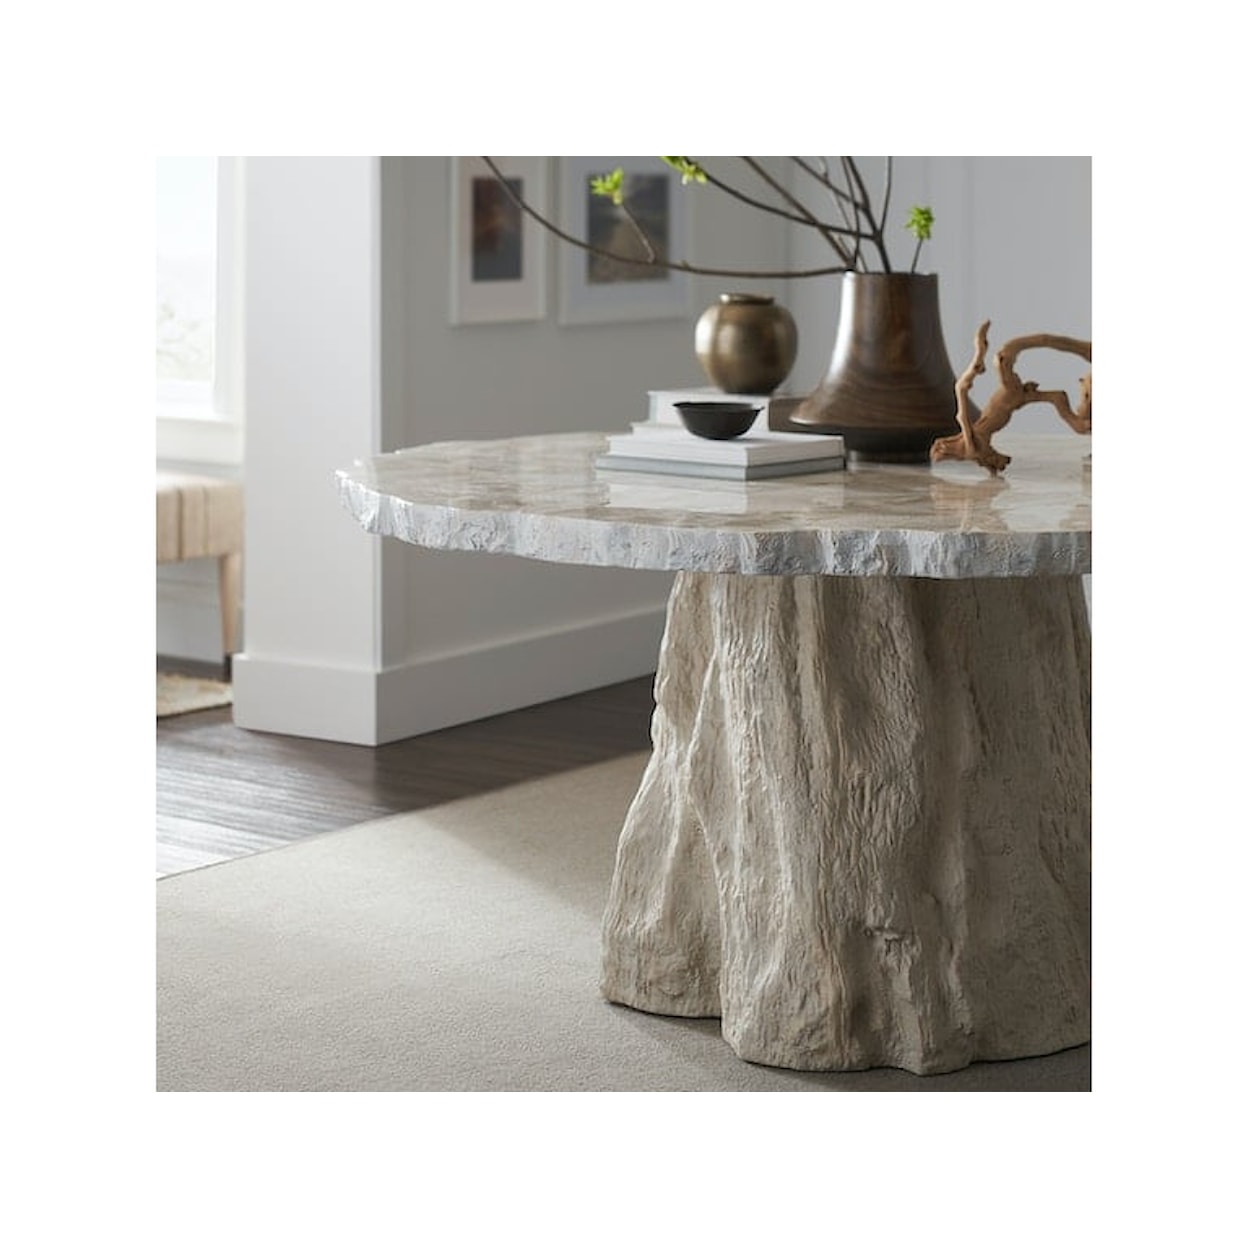 Palecek Camilla Camilla Fossilized Clam Round Dining Table